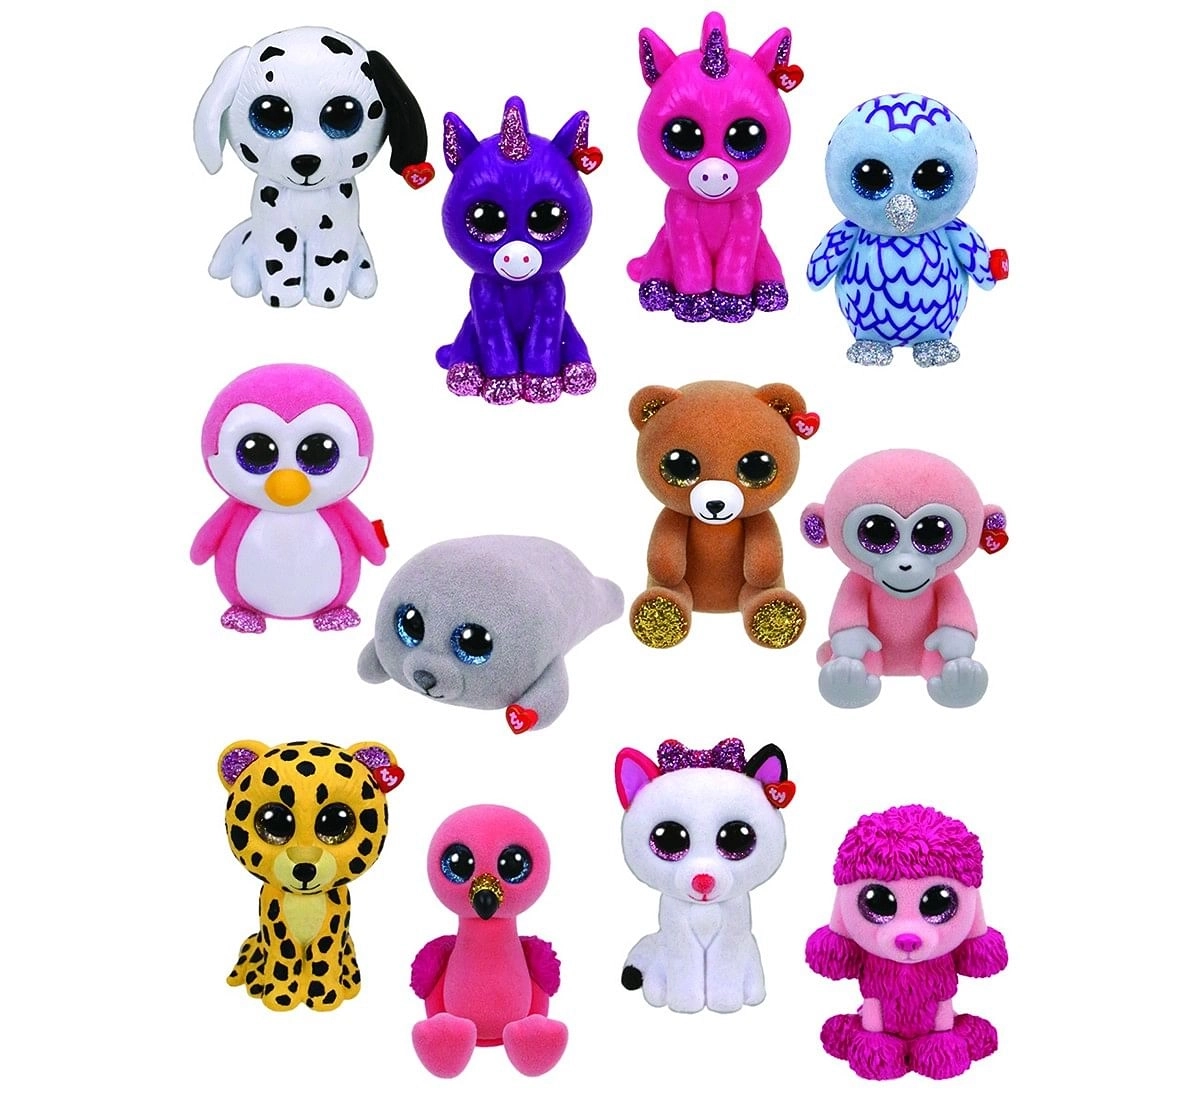 Ty MINI BOOS - Collectibles Series 3 Collectibles for Kids age 3Y+ - 7 Cm 